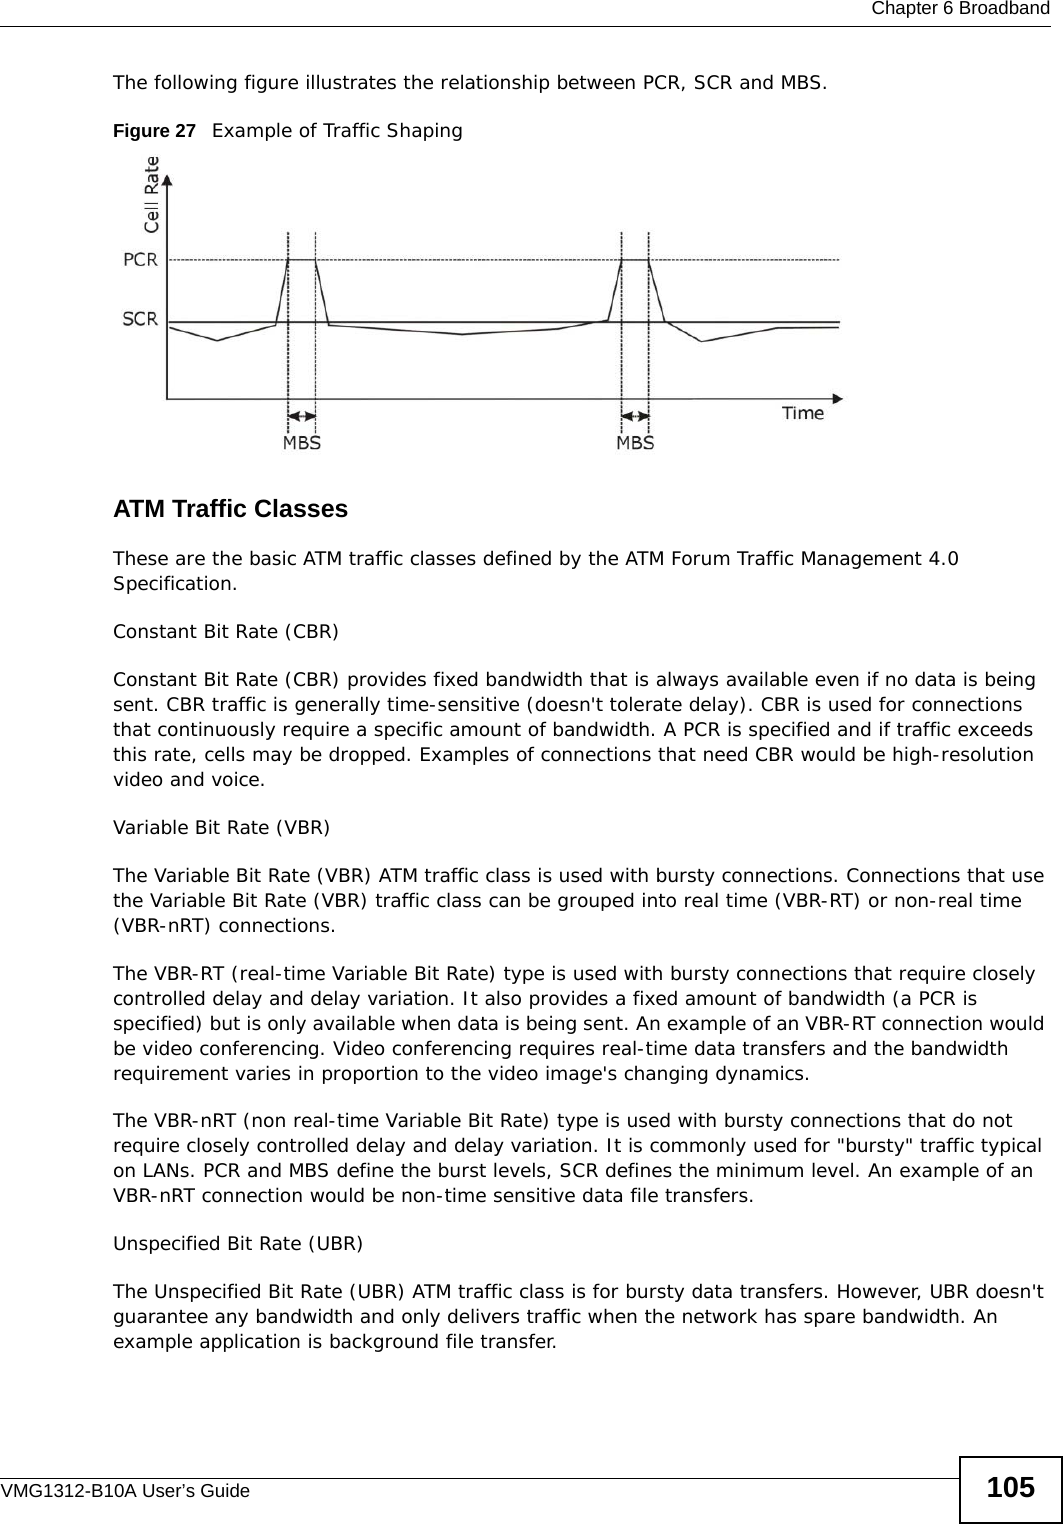  Chapter 6 BroadbandVMG1312-B10A User’s Guide 105The following figure illustrates the relationship between PCR, SCR and MBS. Figure 27   Example of Traffic ShapingATM Traffic ClassesThese are the basic ATM traffic classes defined by the ATM Forum Traffic Management 4.0 Specification. Constant Bit Rate (CBR)Constant Bit Rate (CBR) provides fixed bandwidth that is always available even if no data is being sent. CBR traffic is generally time-sensitive (doesn&apos;t tolerate delay). CBR is used for connections that continuously require a specific amount of bandwidth. A PCR is specified and if traffic exceeds this rate, cells may be dropped. Examples of connections that need CBR would be high-resolution video and voice.Variable Bit Rate (VBR) The Variable Bit Rate (VBR) ATM traffic class is used with bursty connections. Connections that use the Variable Bit Rate (VBR) traffic class can be grouped into real time (VBR-RT) or non-real time (VBR-nRT) connections. The VBR-RT (real-time Variable Bit Rate) type is used with bursty connections that require closely controlled delay and delay variation. It also provides a fixed amount of bandwidth (a PCR is specified) but is only available when data is being sent. An example of an VBR-RT connection would be video conferencing. Video conferencing requires real-time data transfers and the bandwidth requirement varies in proportion to the video image&apos;s changing dynamics. The VBR-nRT (non real-time Variable Bit Rate) type is used with bursty connections that do not require closely controlled delay and delay variation. It is commonly used for &quot;bursty&quot; traffic typical on LANs. PCR and MBS define the burst levels, SCR defines the minimum level. An example of an VBR-nRT connection would be non-time sensitive data file transfers.Unspecified Bit Rate (UBR)The Unspecified Bit Rate (UBR) ATM traffic class is for bursty data transfers. However, UBR doesn&apos;t guarantee any bandwidth and only delivers traffic when the network has spare bandwidth. An example application is background file transfer.